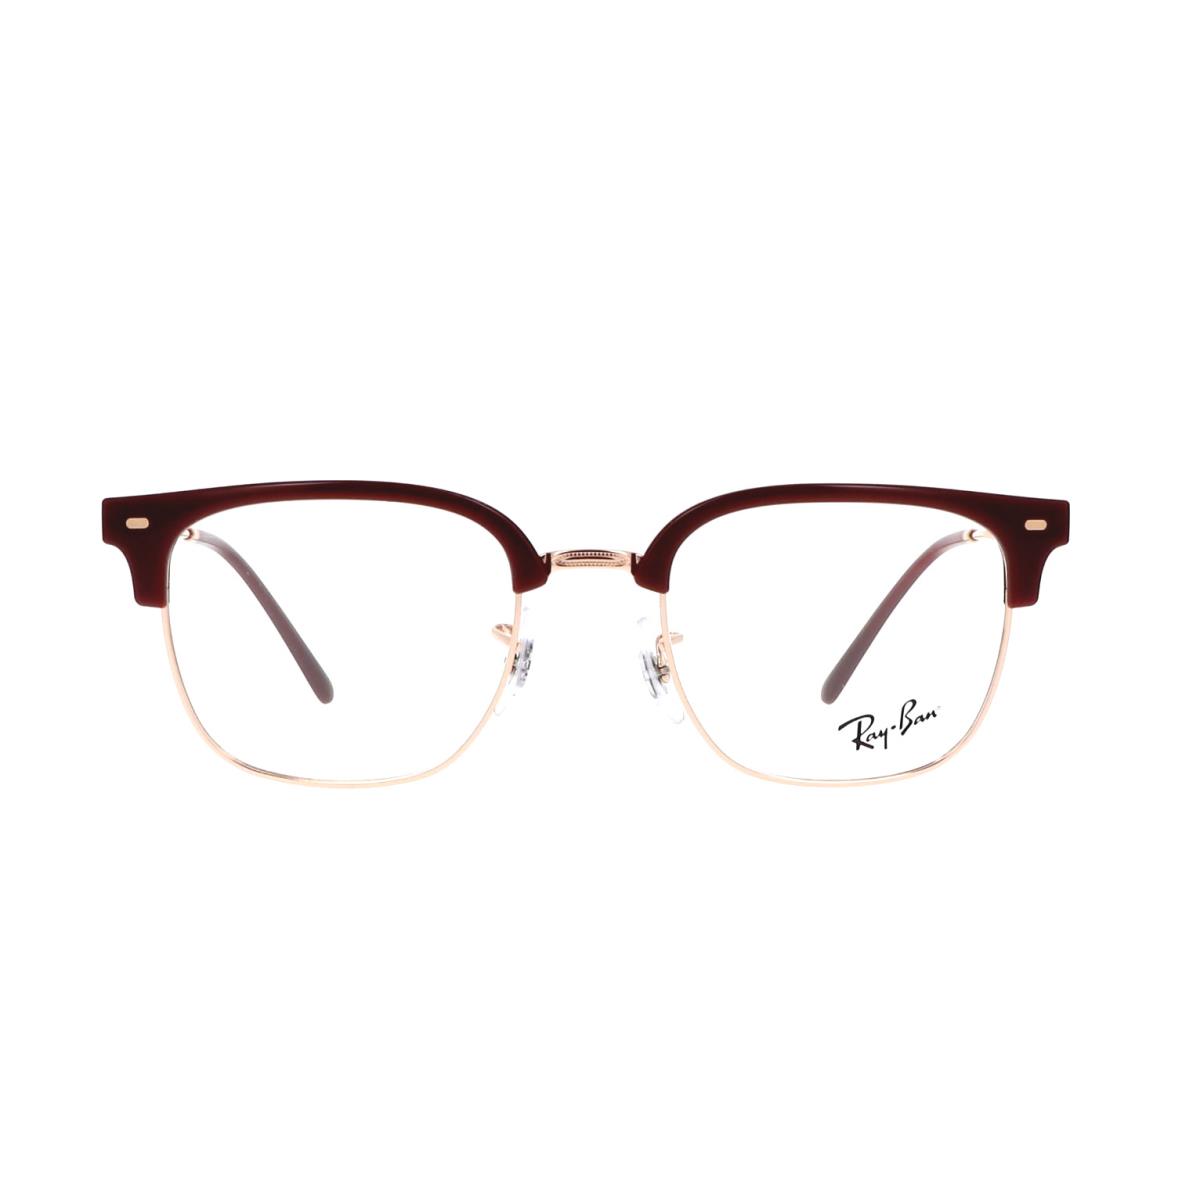 Ray-ban Clubmaster Reading Glasses RB 7216 8209 Burgundy Gold Frames Readers - Bordeaux Dark Burgundy and Rose Gold, Frame: Burgundy & Rose Gold, Lens: